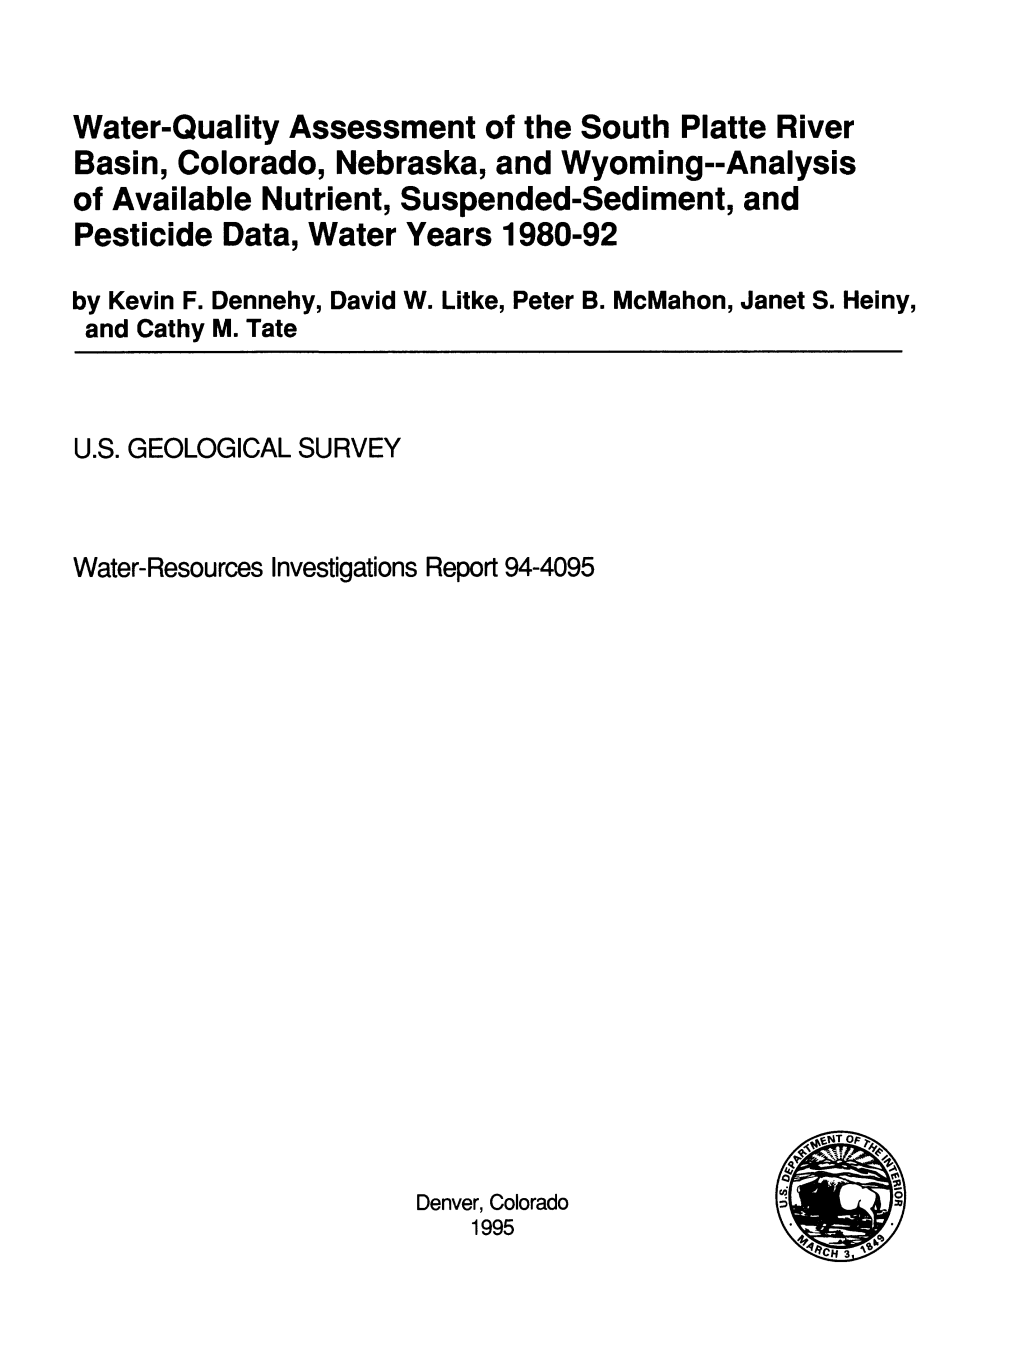 Water-Quality Assessment of the South Platte River Basin, Colorado